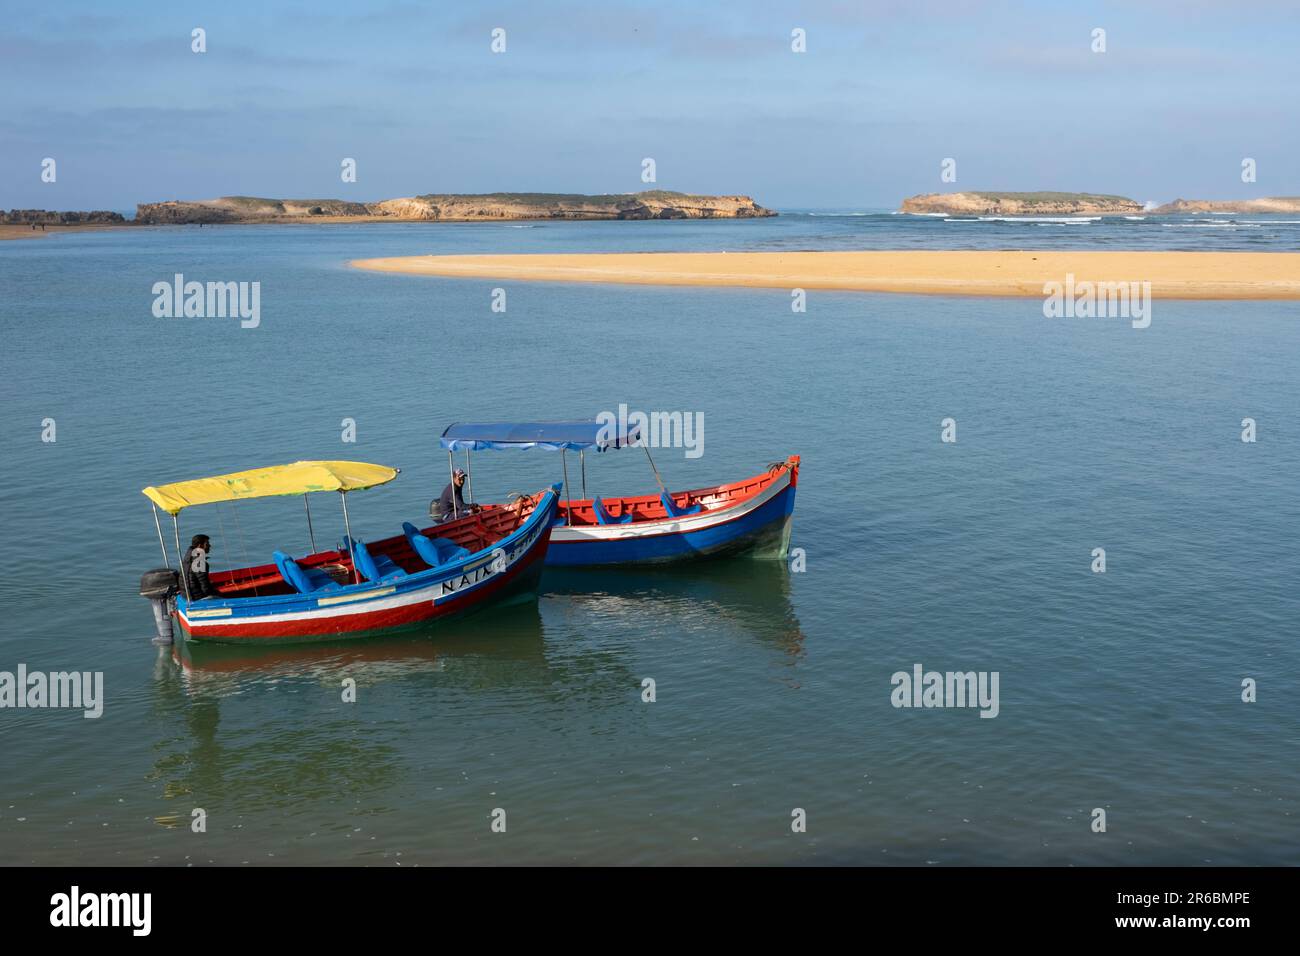 Colourful boats on the intertidal lagoon water at Oualidia in Morocco Stock Photo